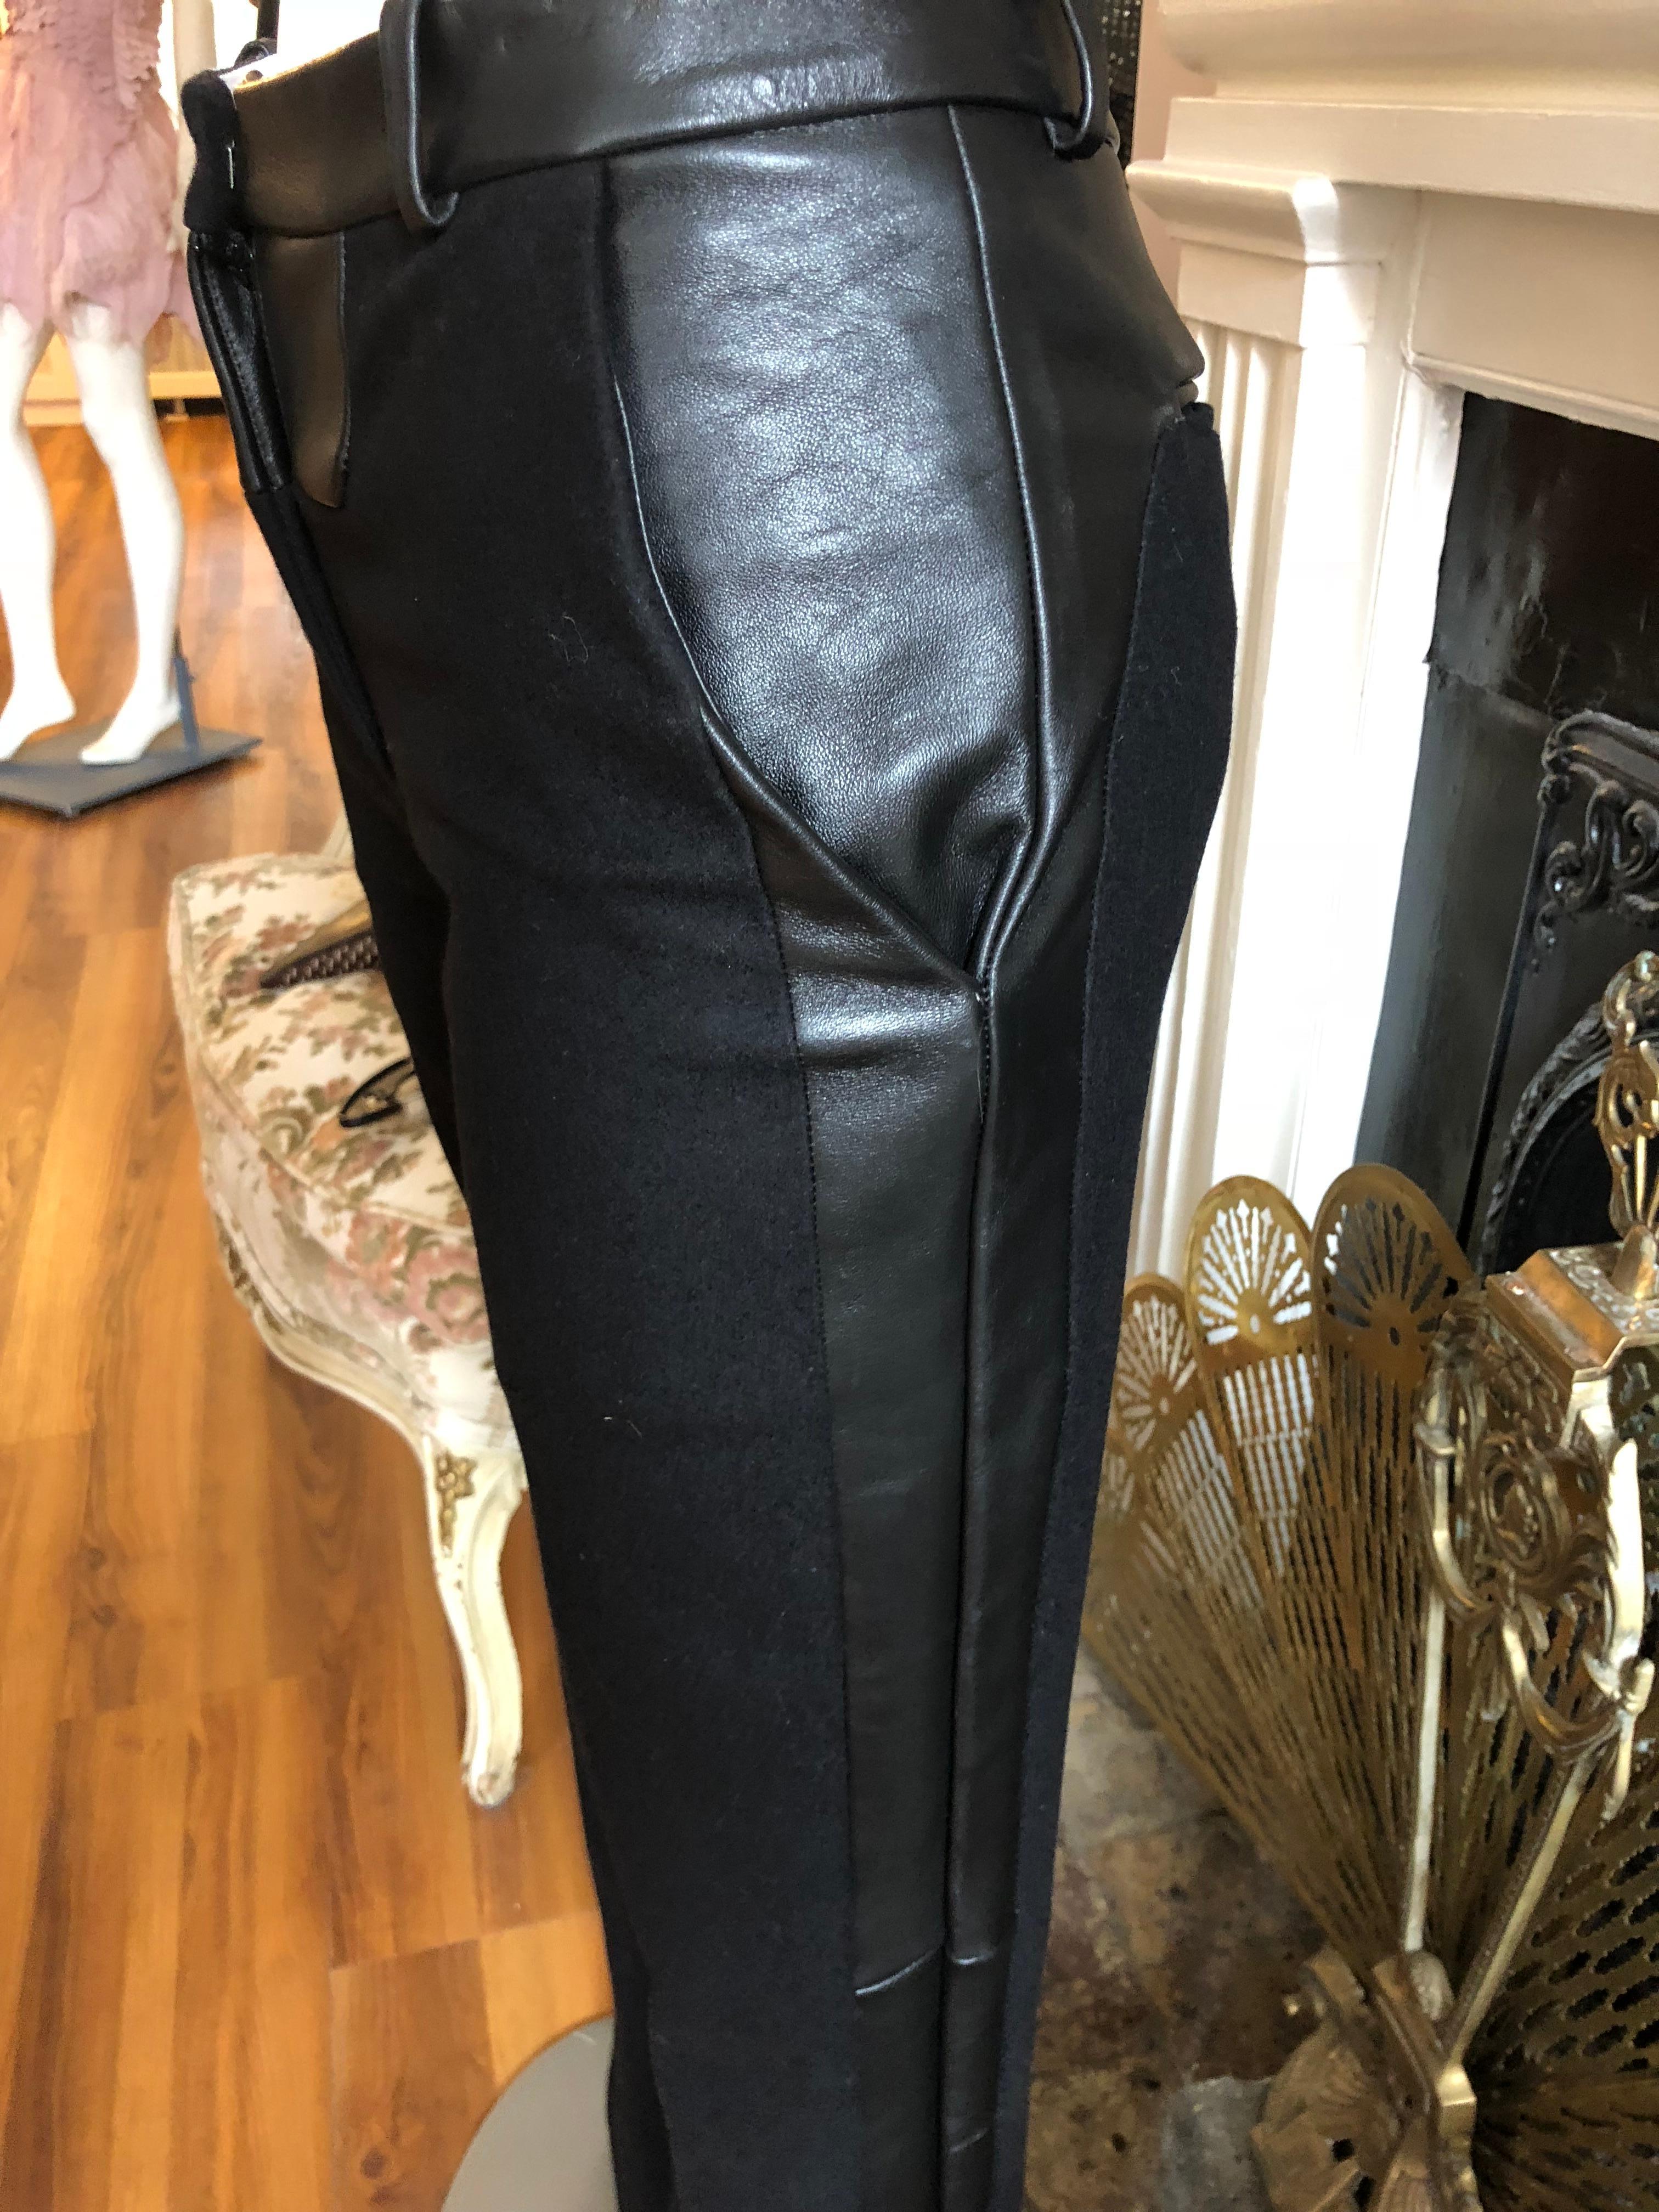 We believe these were a runway piece and are beautifully tailored. The straight leg pants are mid-rise; have lambskin side panels on each leg and hems, as well as at the waist and slit pockets. Closure is at the middle front with a zip and eye and